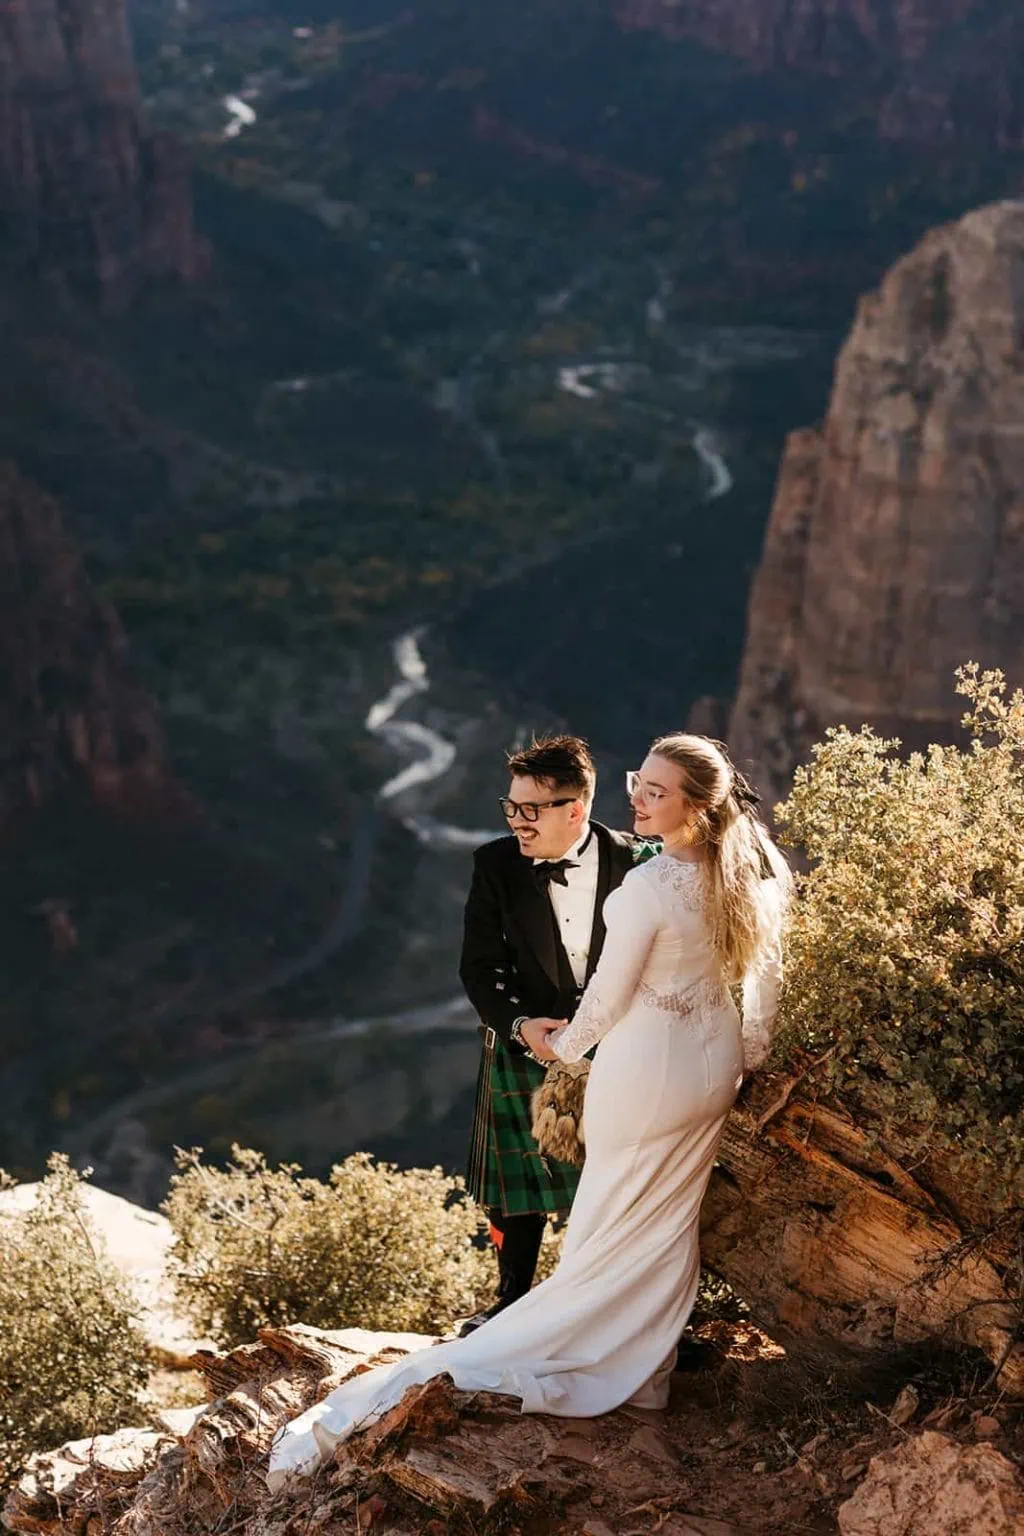 A couple holds hands and take in the canyon views together on their wedding day.